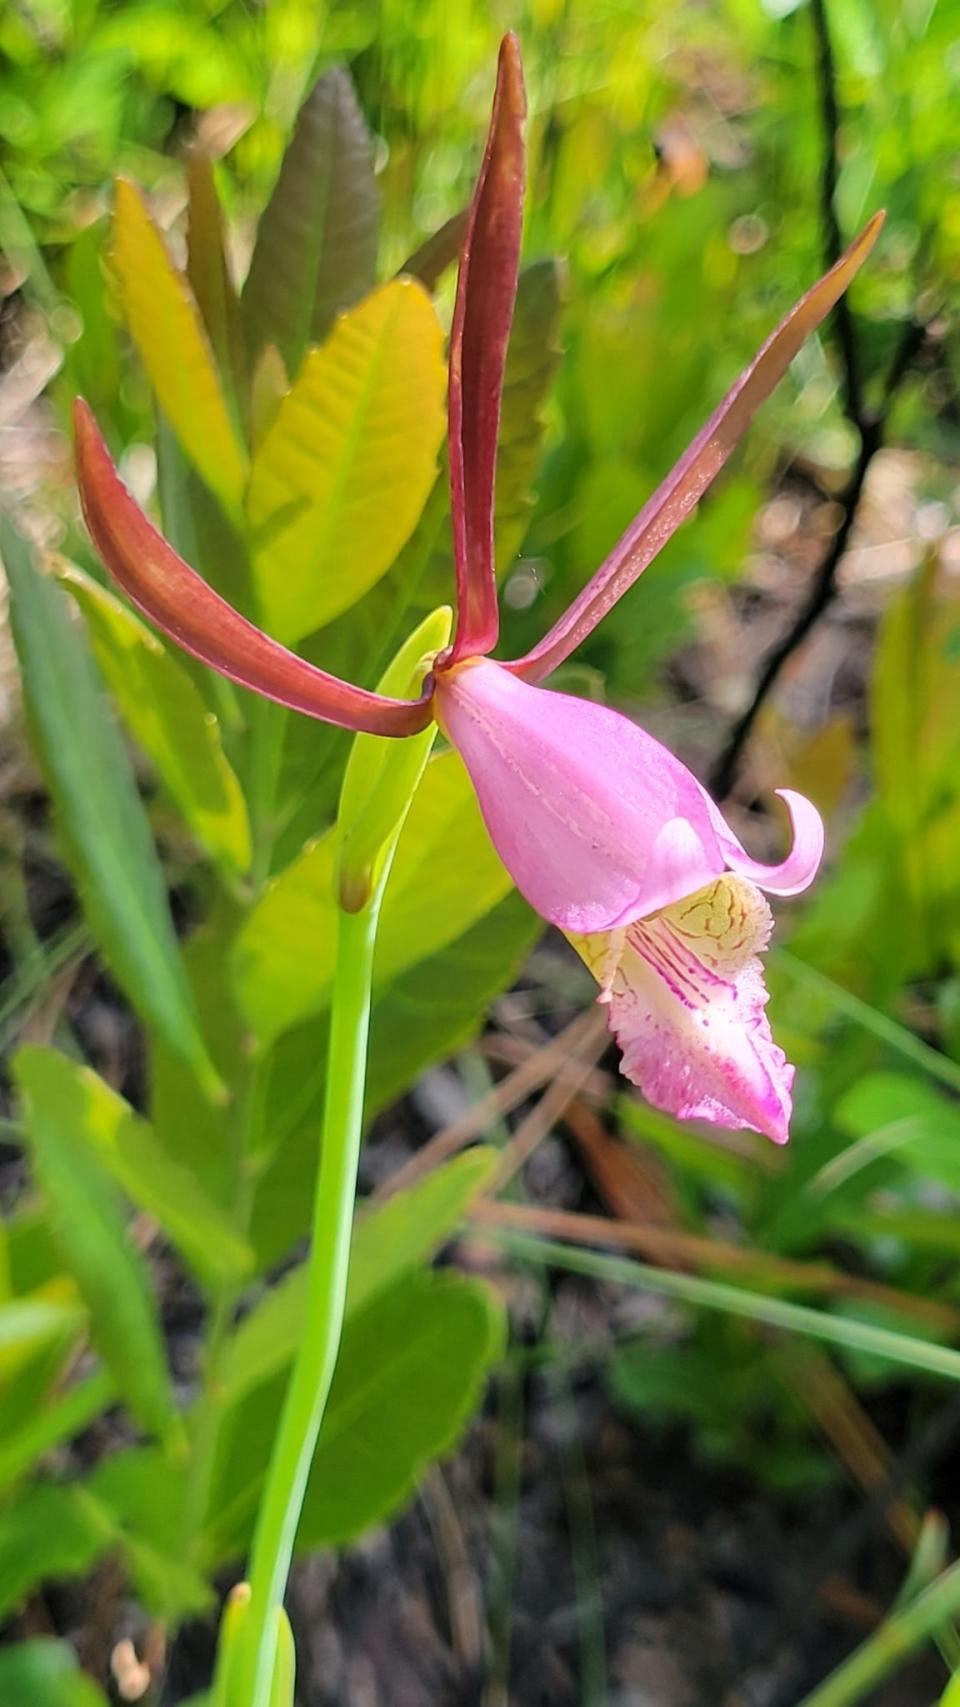 The rosebud orchid, one of the more elusive species in the national park, is a rare but special surprise to observe along trails in spring. Even keen observers often miss the flower, as it sprouts up from what is often mistaken for a patch of weeds.